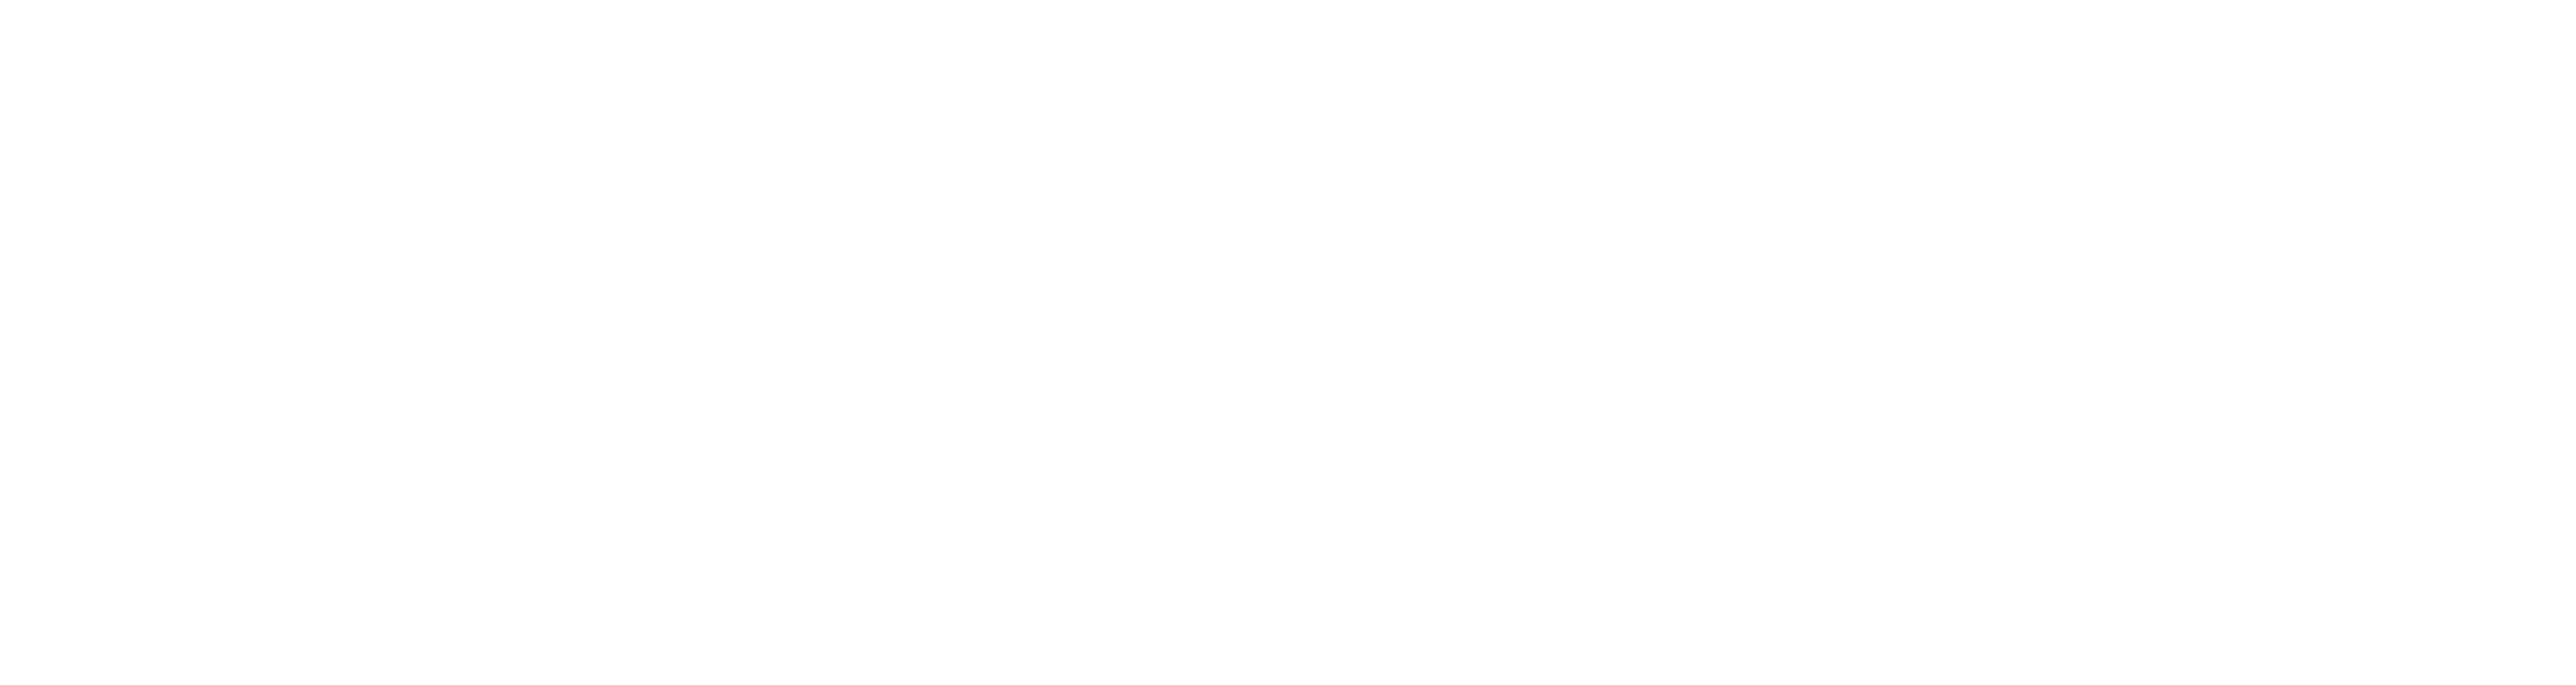 Tech Terrain College - Industry Focused, Hands-On Education